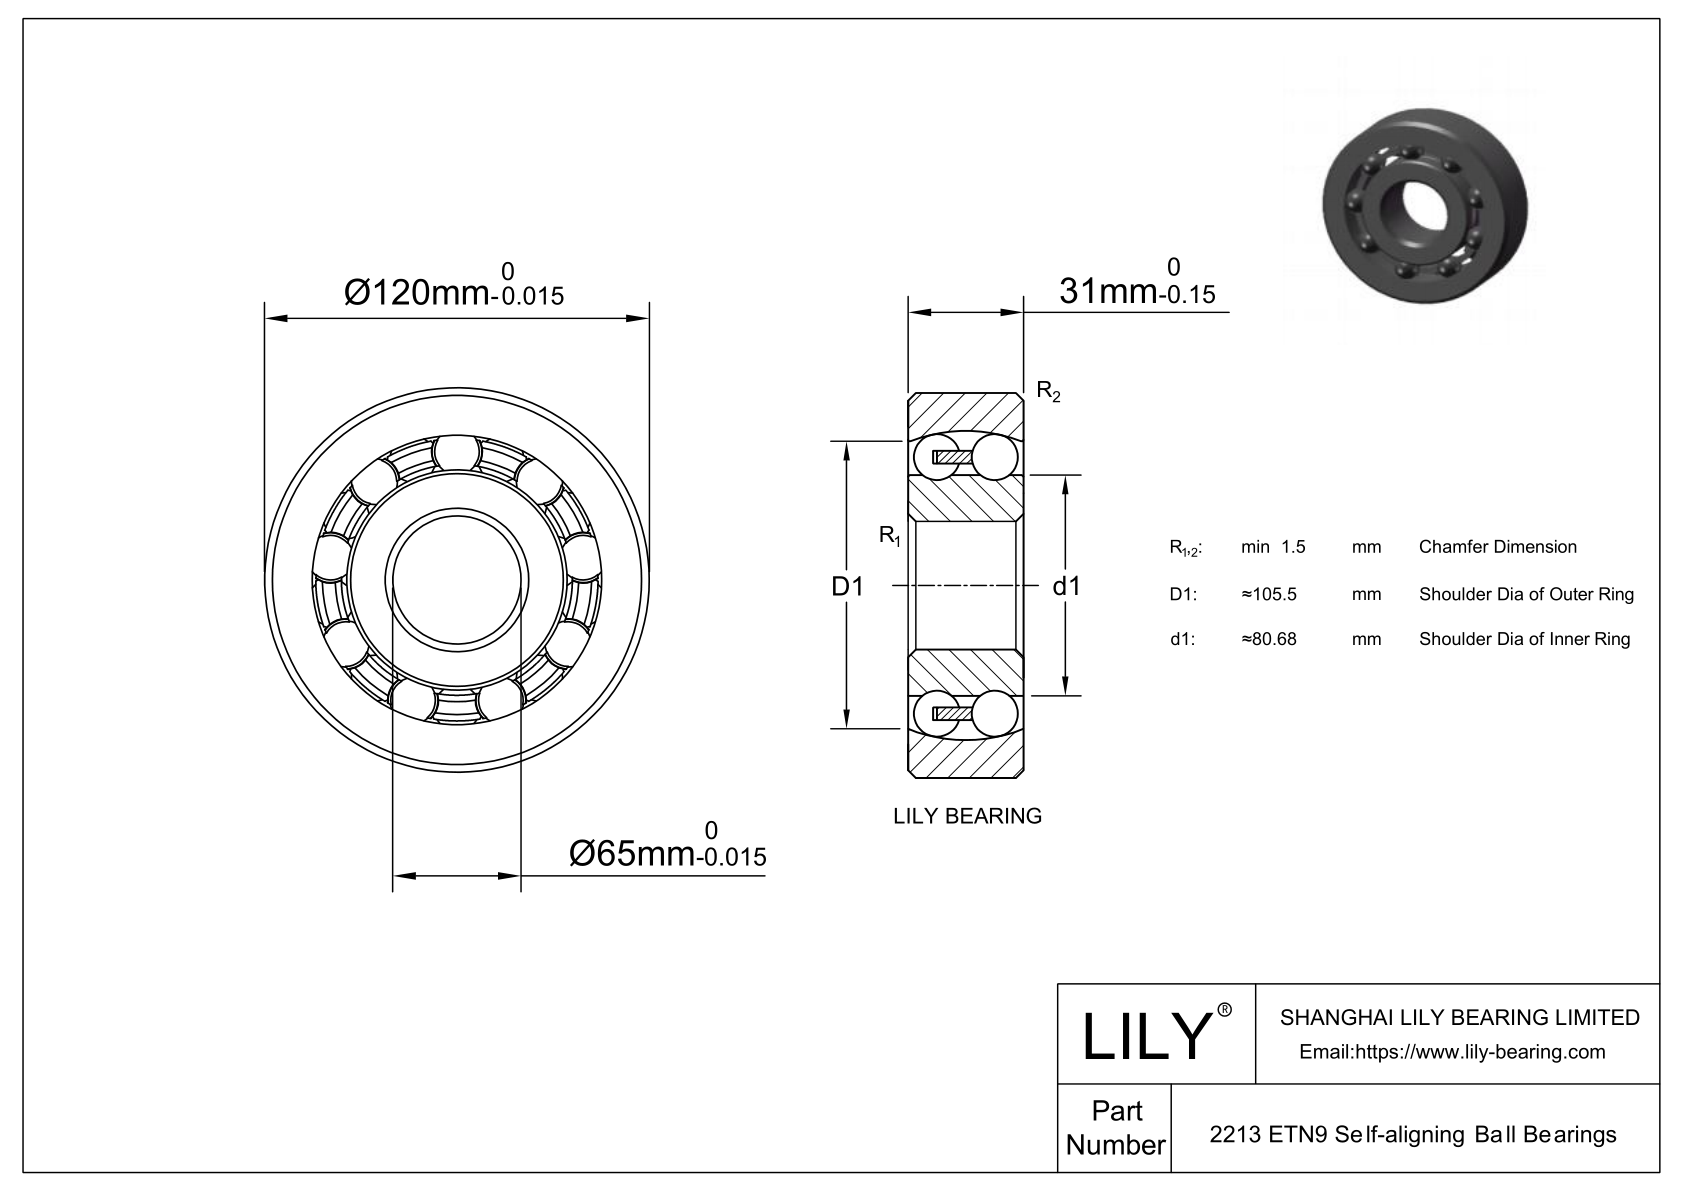 S2213 ETN9 Stainless Steel Self Aligning Ball Bearings cad drawing